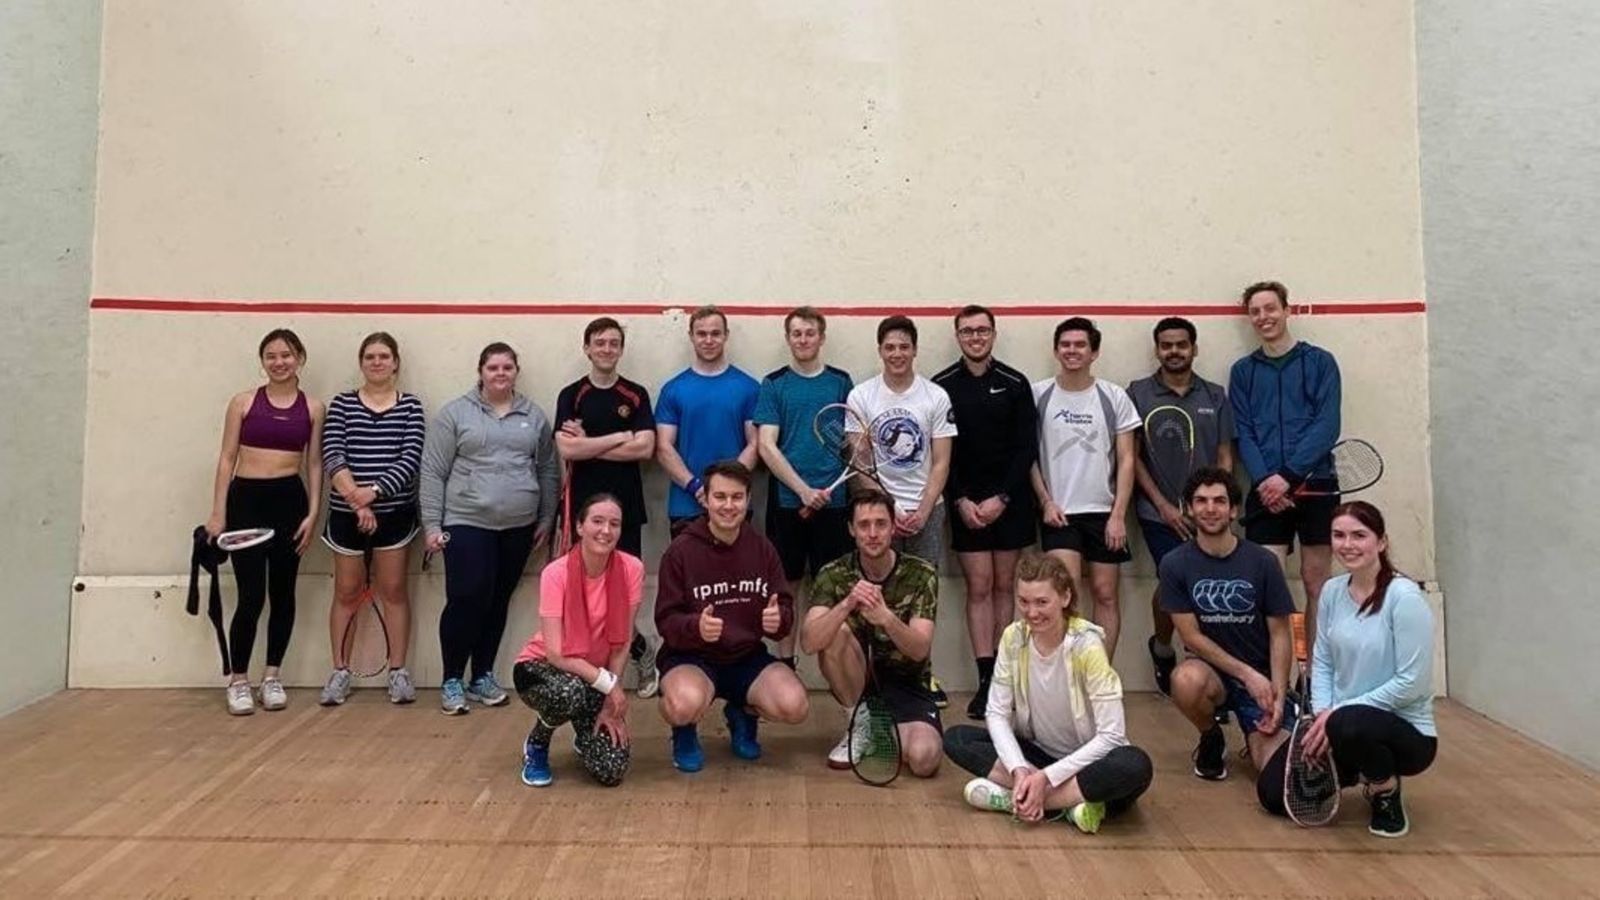 Group picture of players and their gear in squash room.